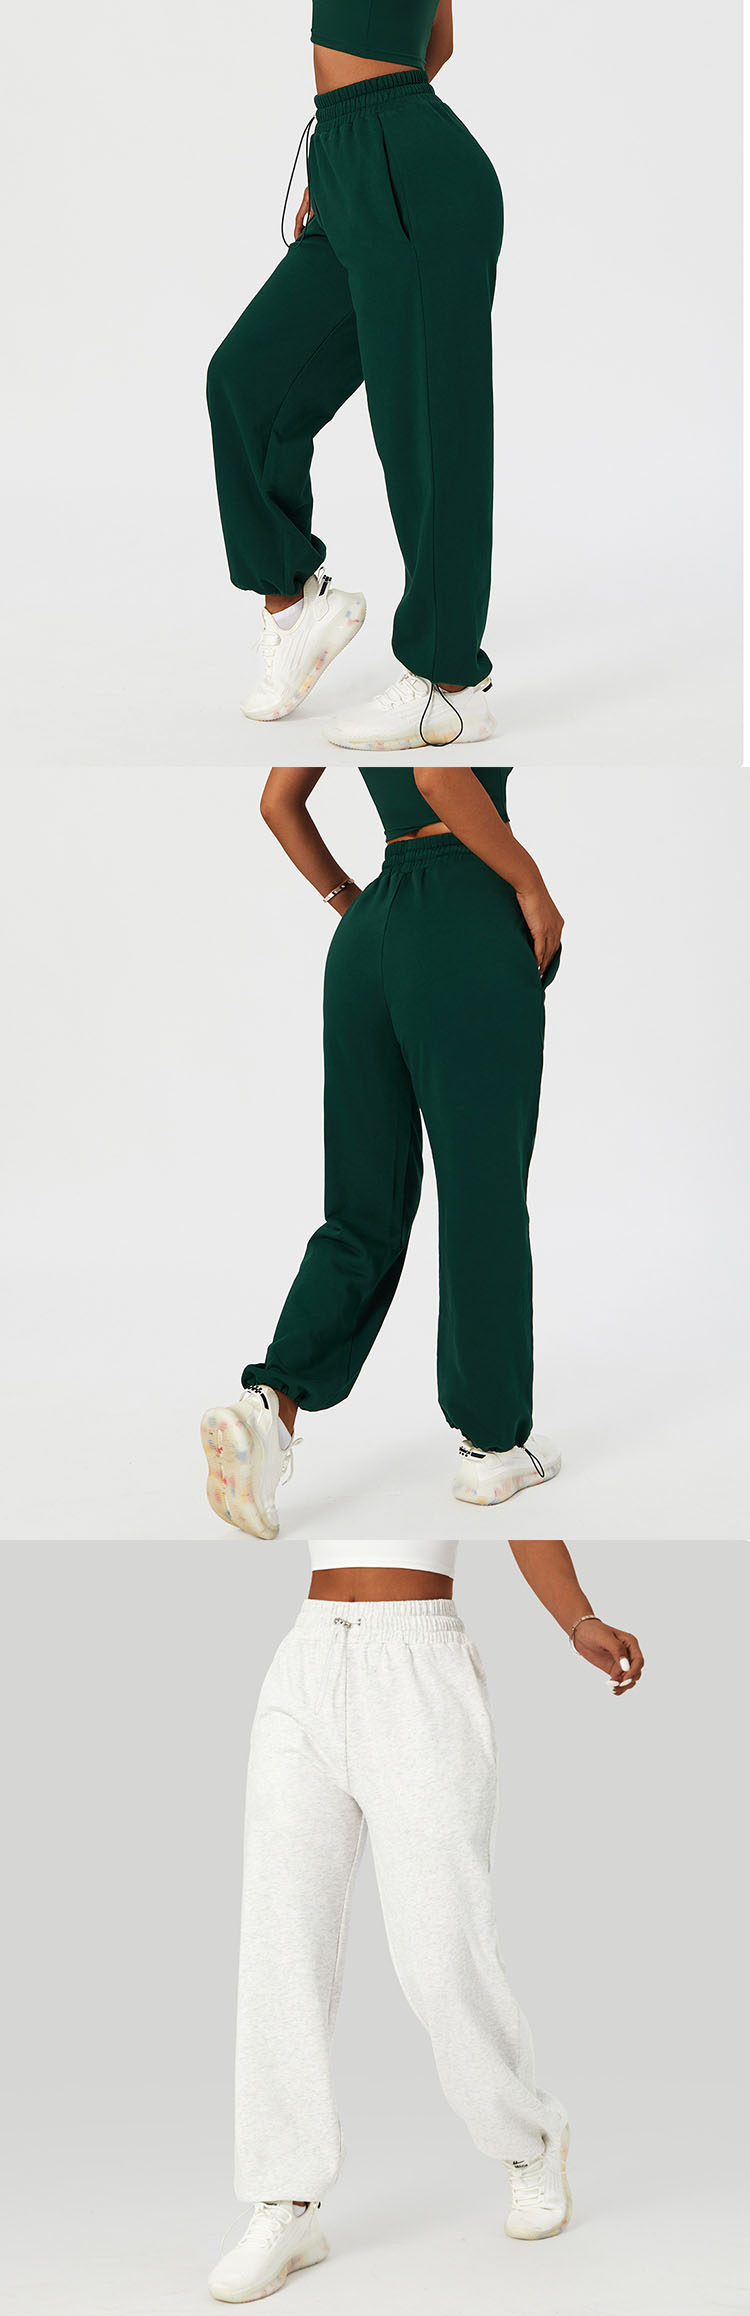 Plus size workout pants have always been a popular silhouette in women's trousers design